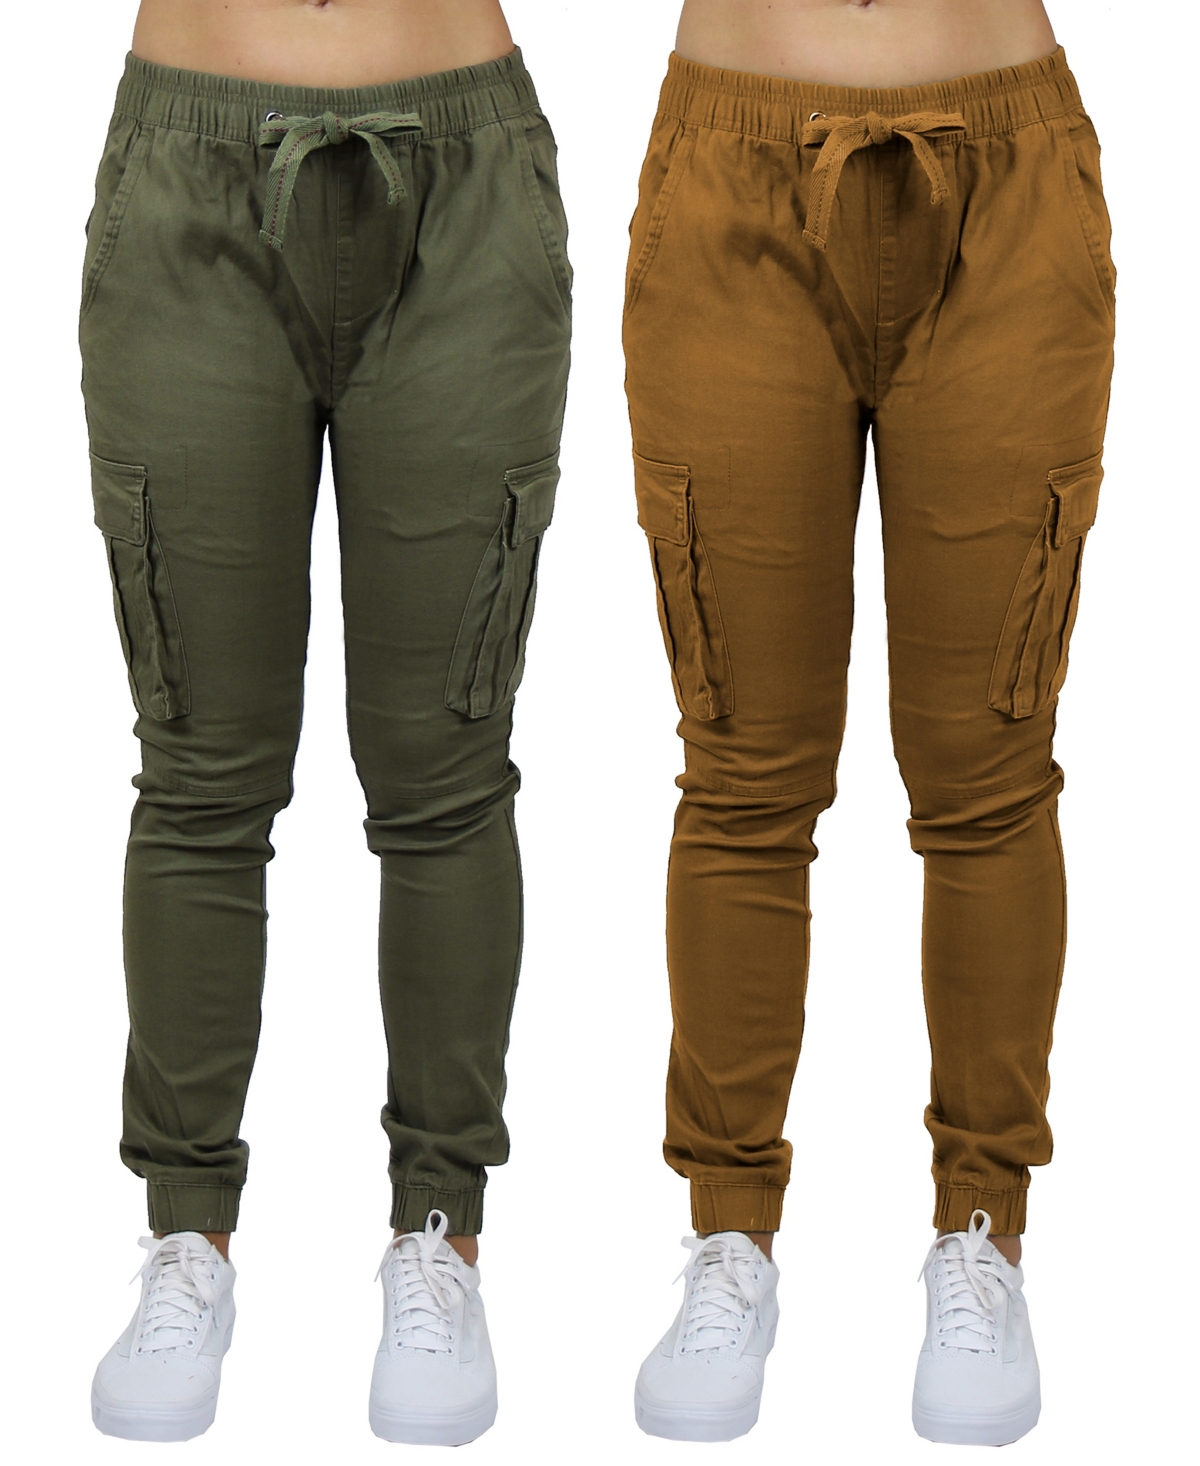 Galaxy By Harvic Women's Loose Fit Cotton Stretch Twill Cargo Joggers Set, 2 Pack In Olive,timber